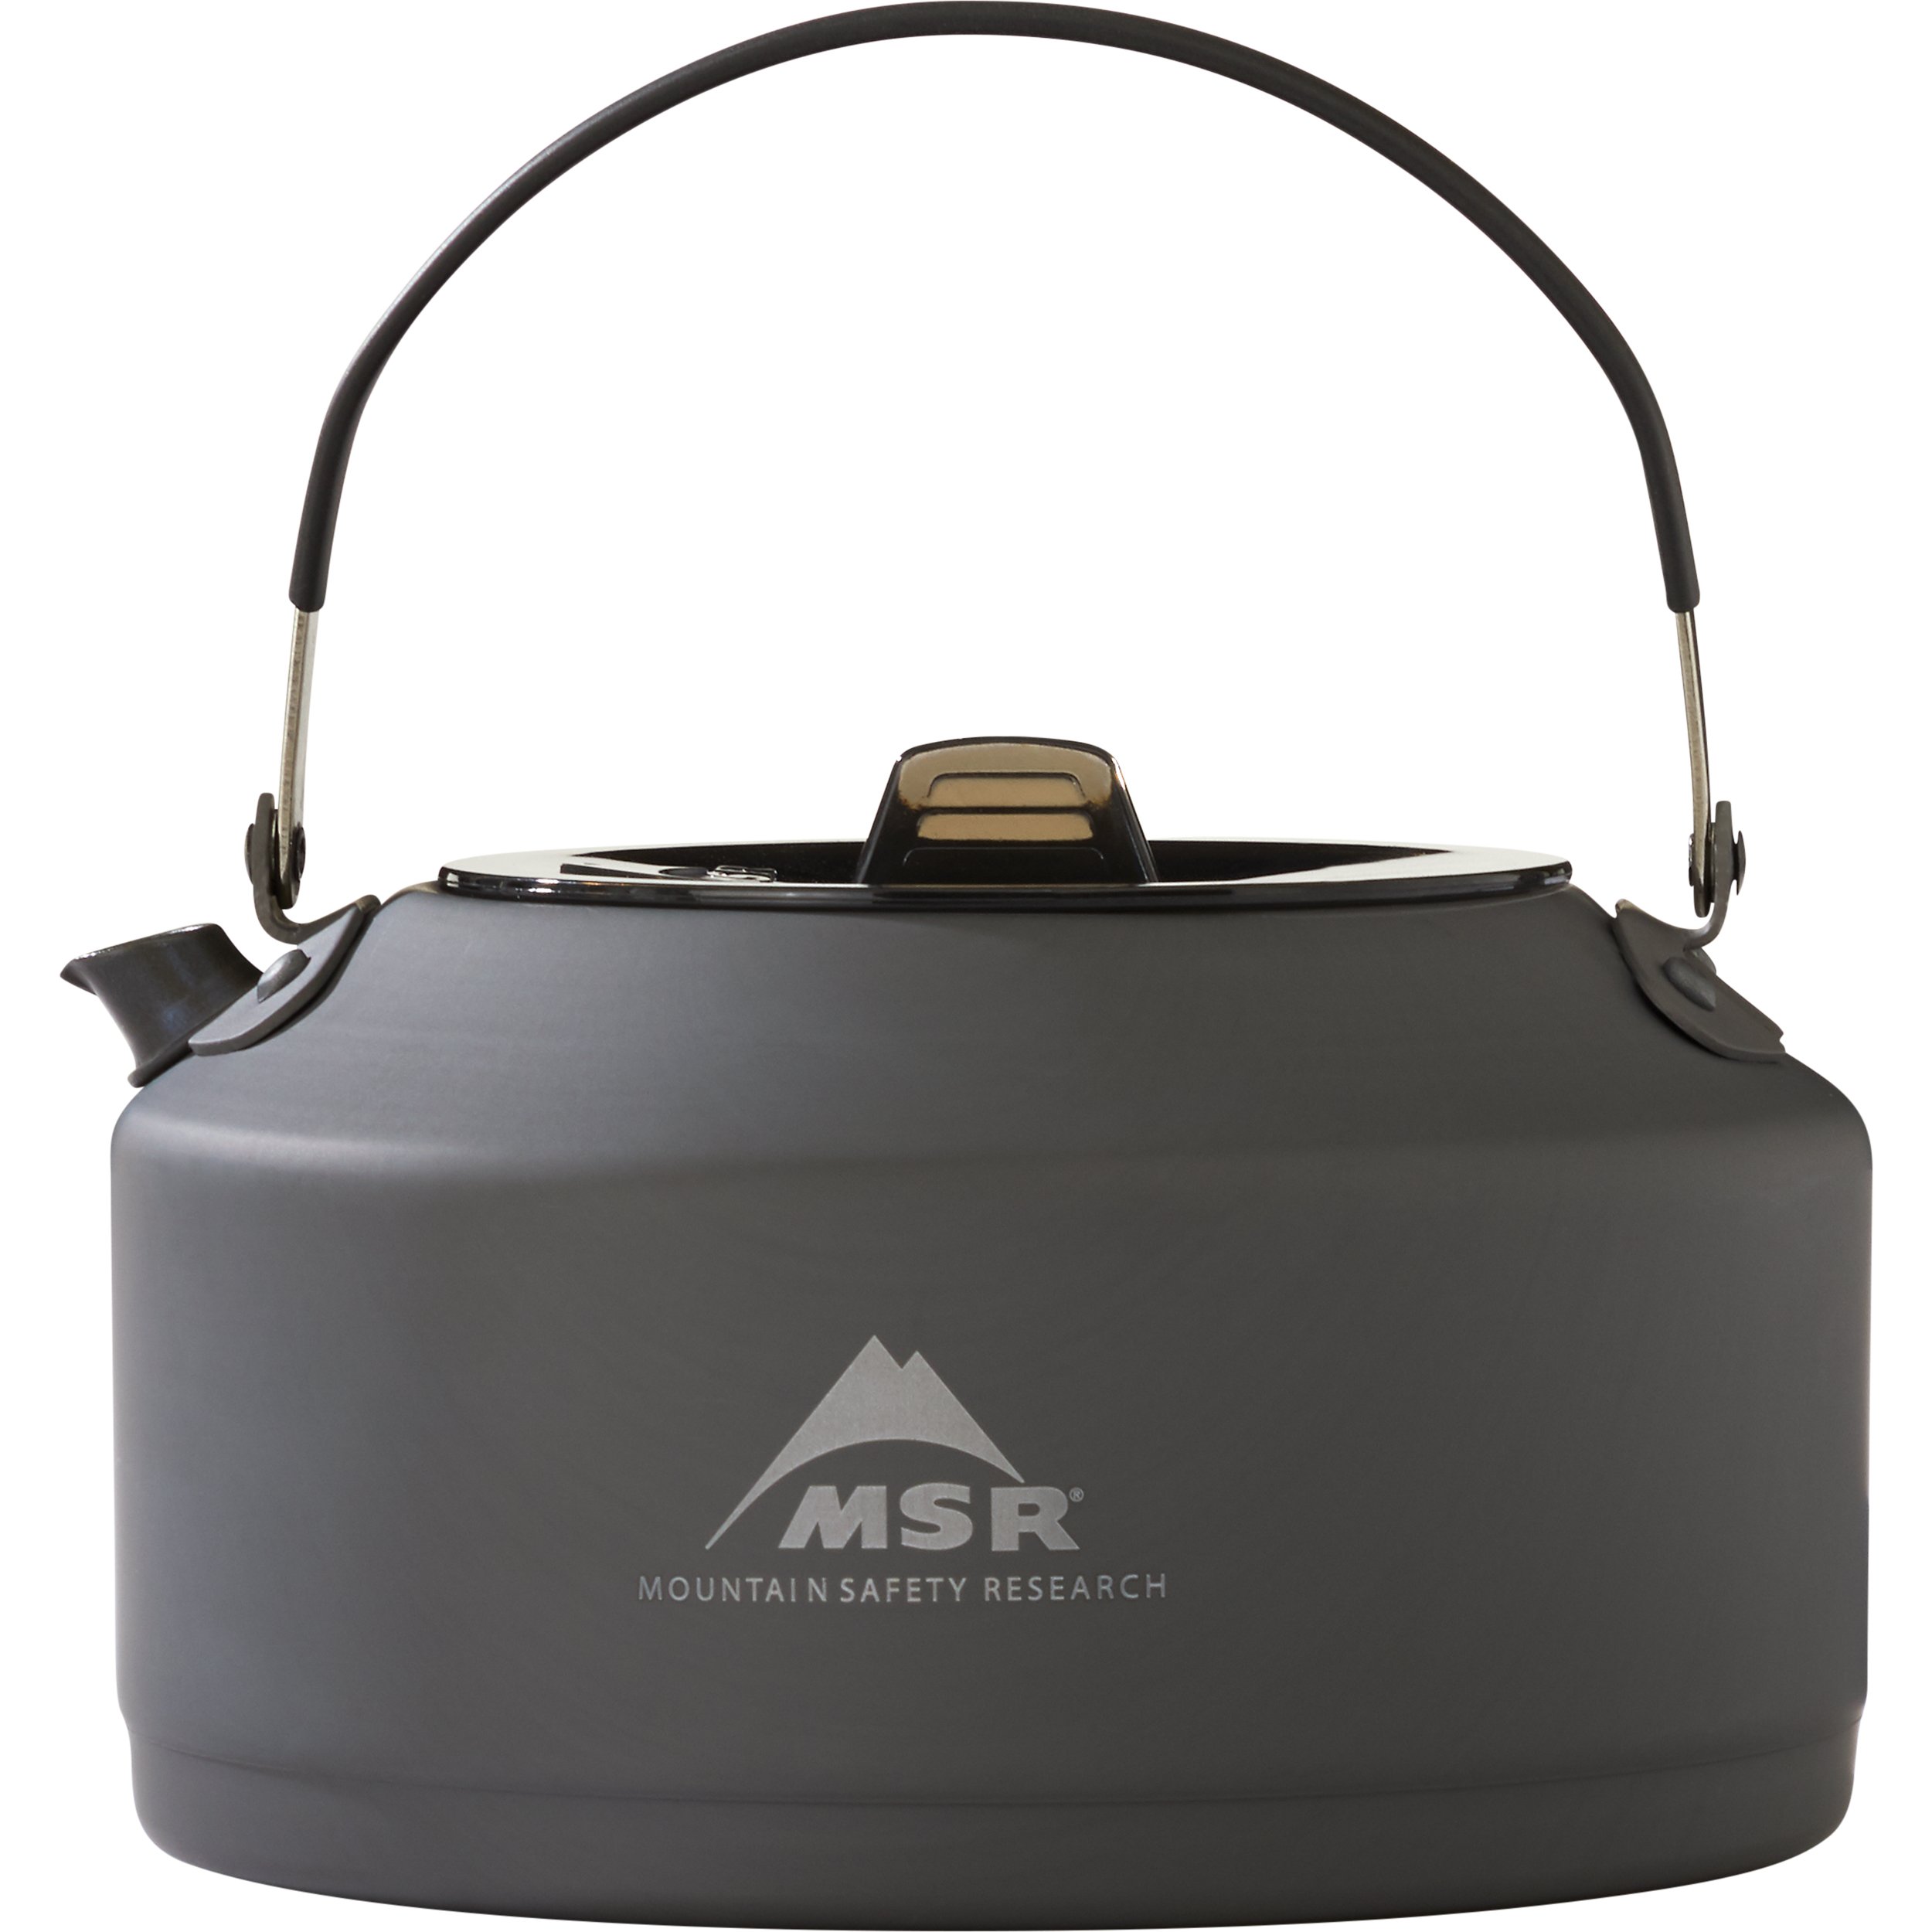 A Camping Tea Kettle On A Propane Stove Next To A Metal Cup Stock